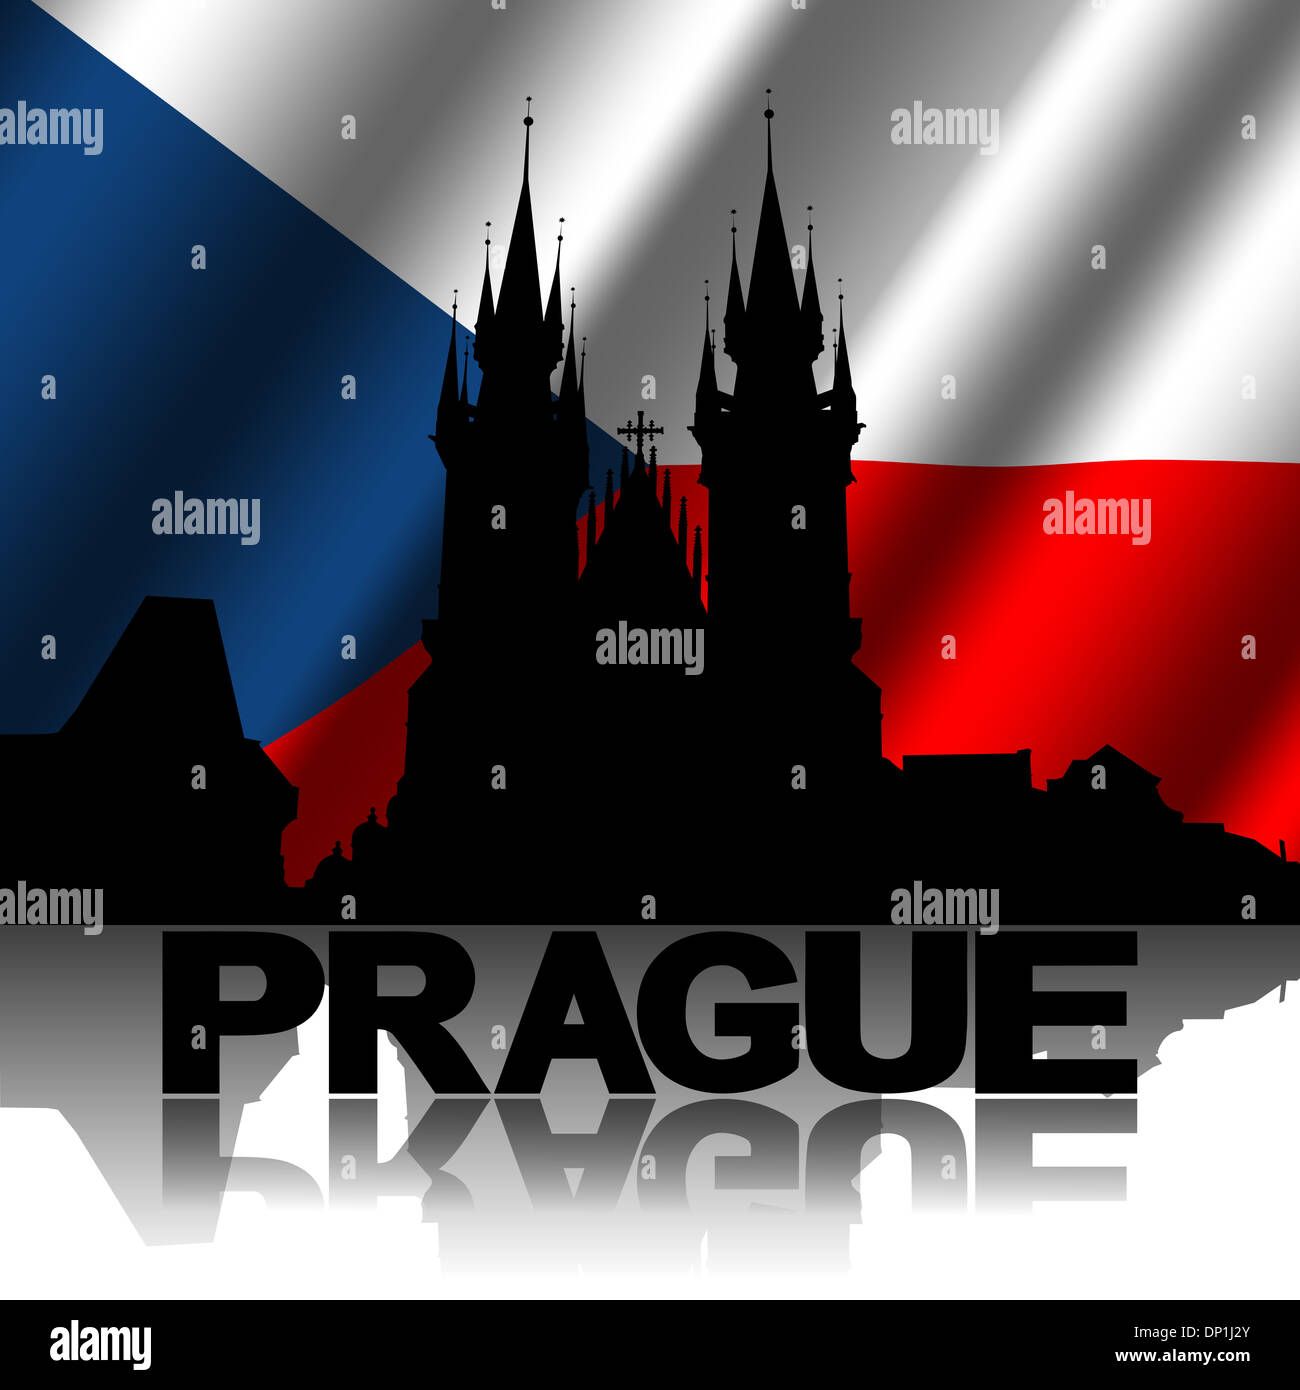 Prague skyline and text reflected with rippled Czech flag illustration Stock Photo